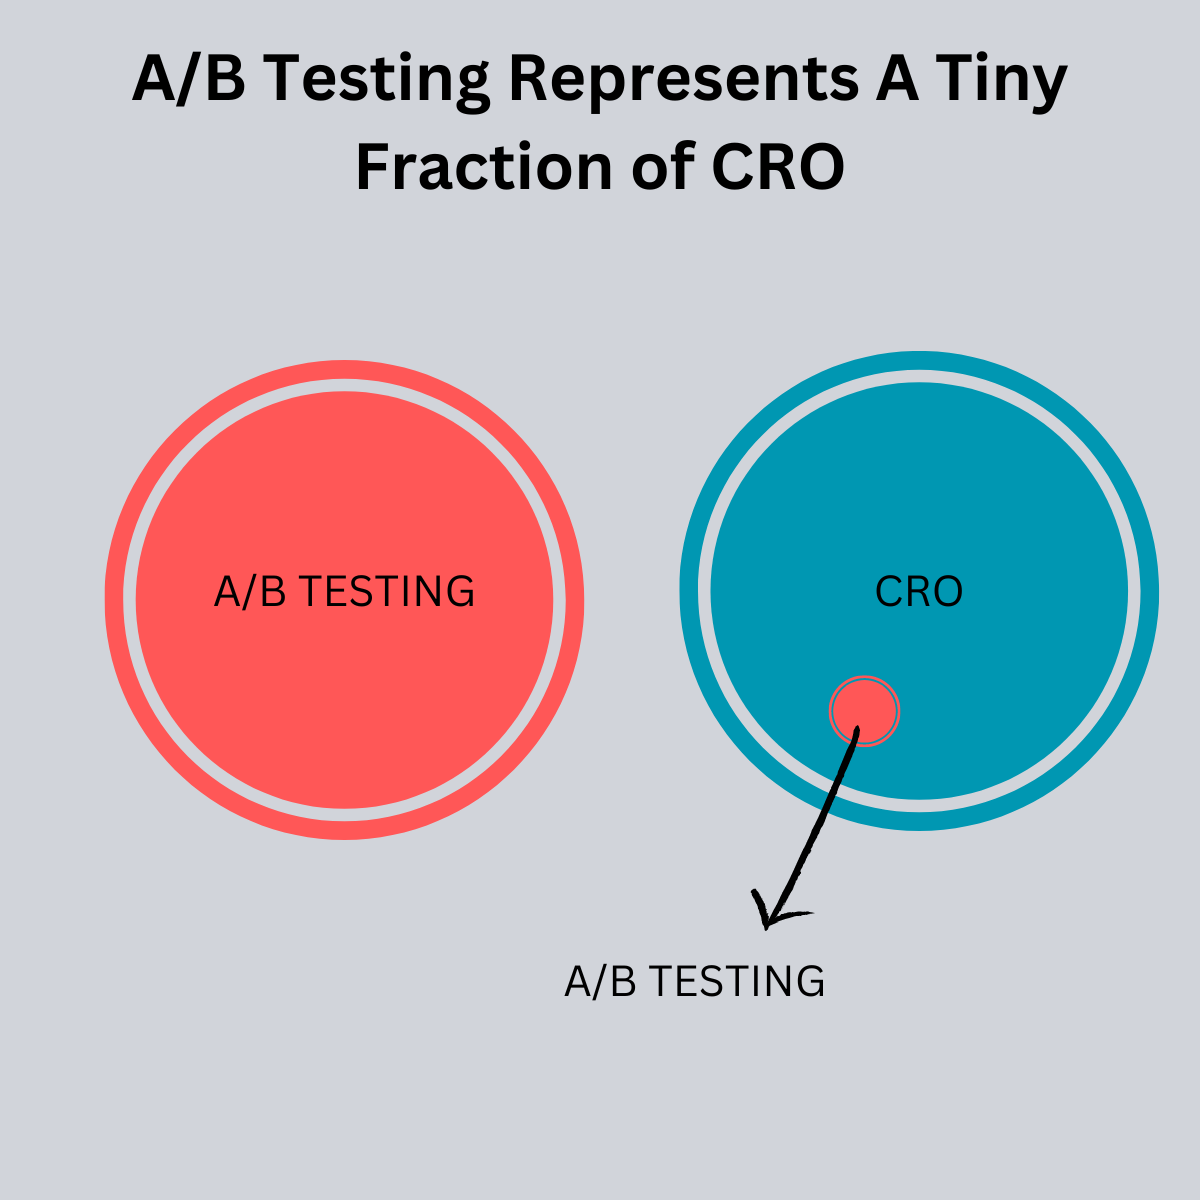 A/B Testing and CRO